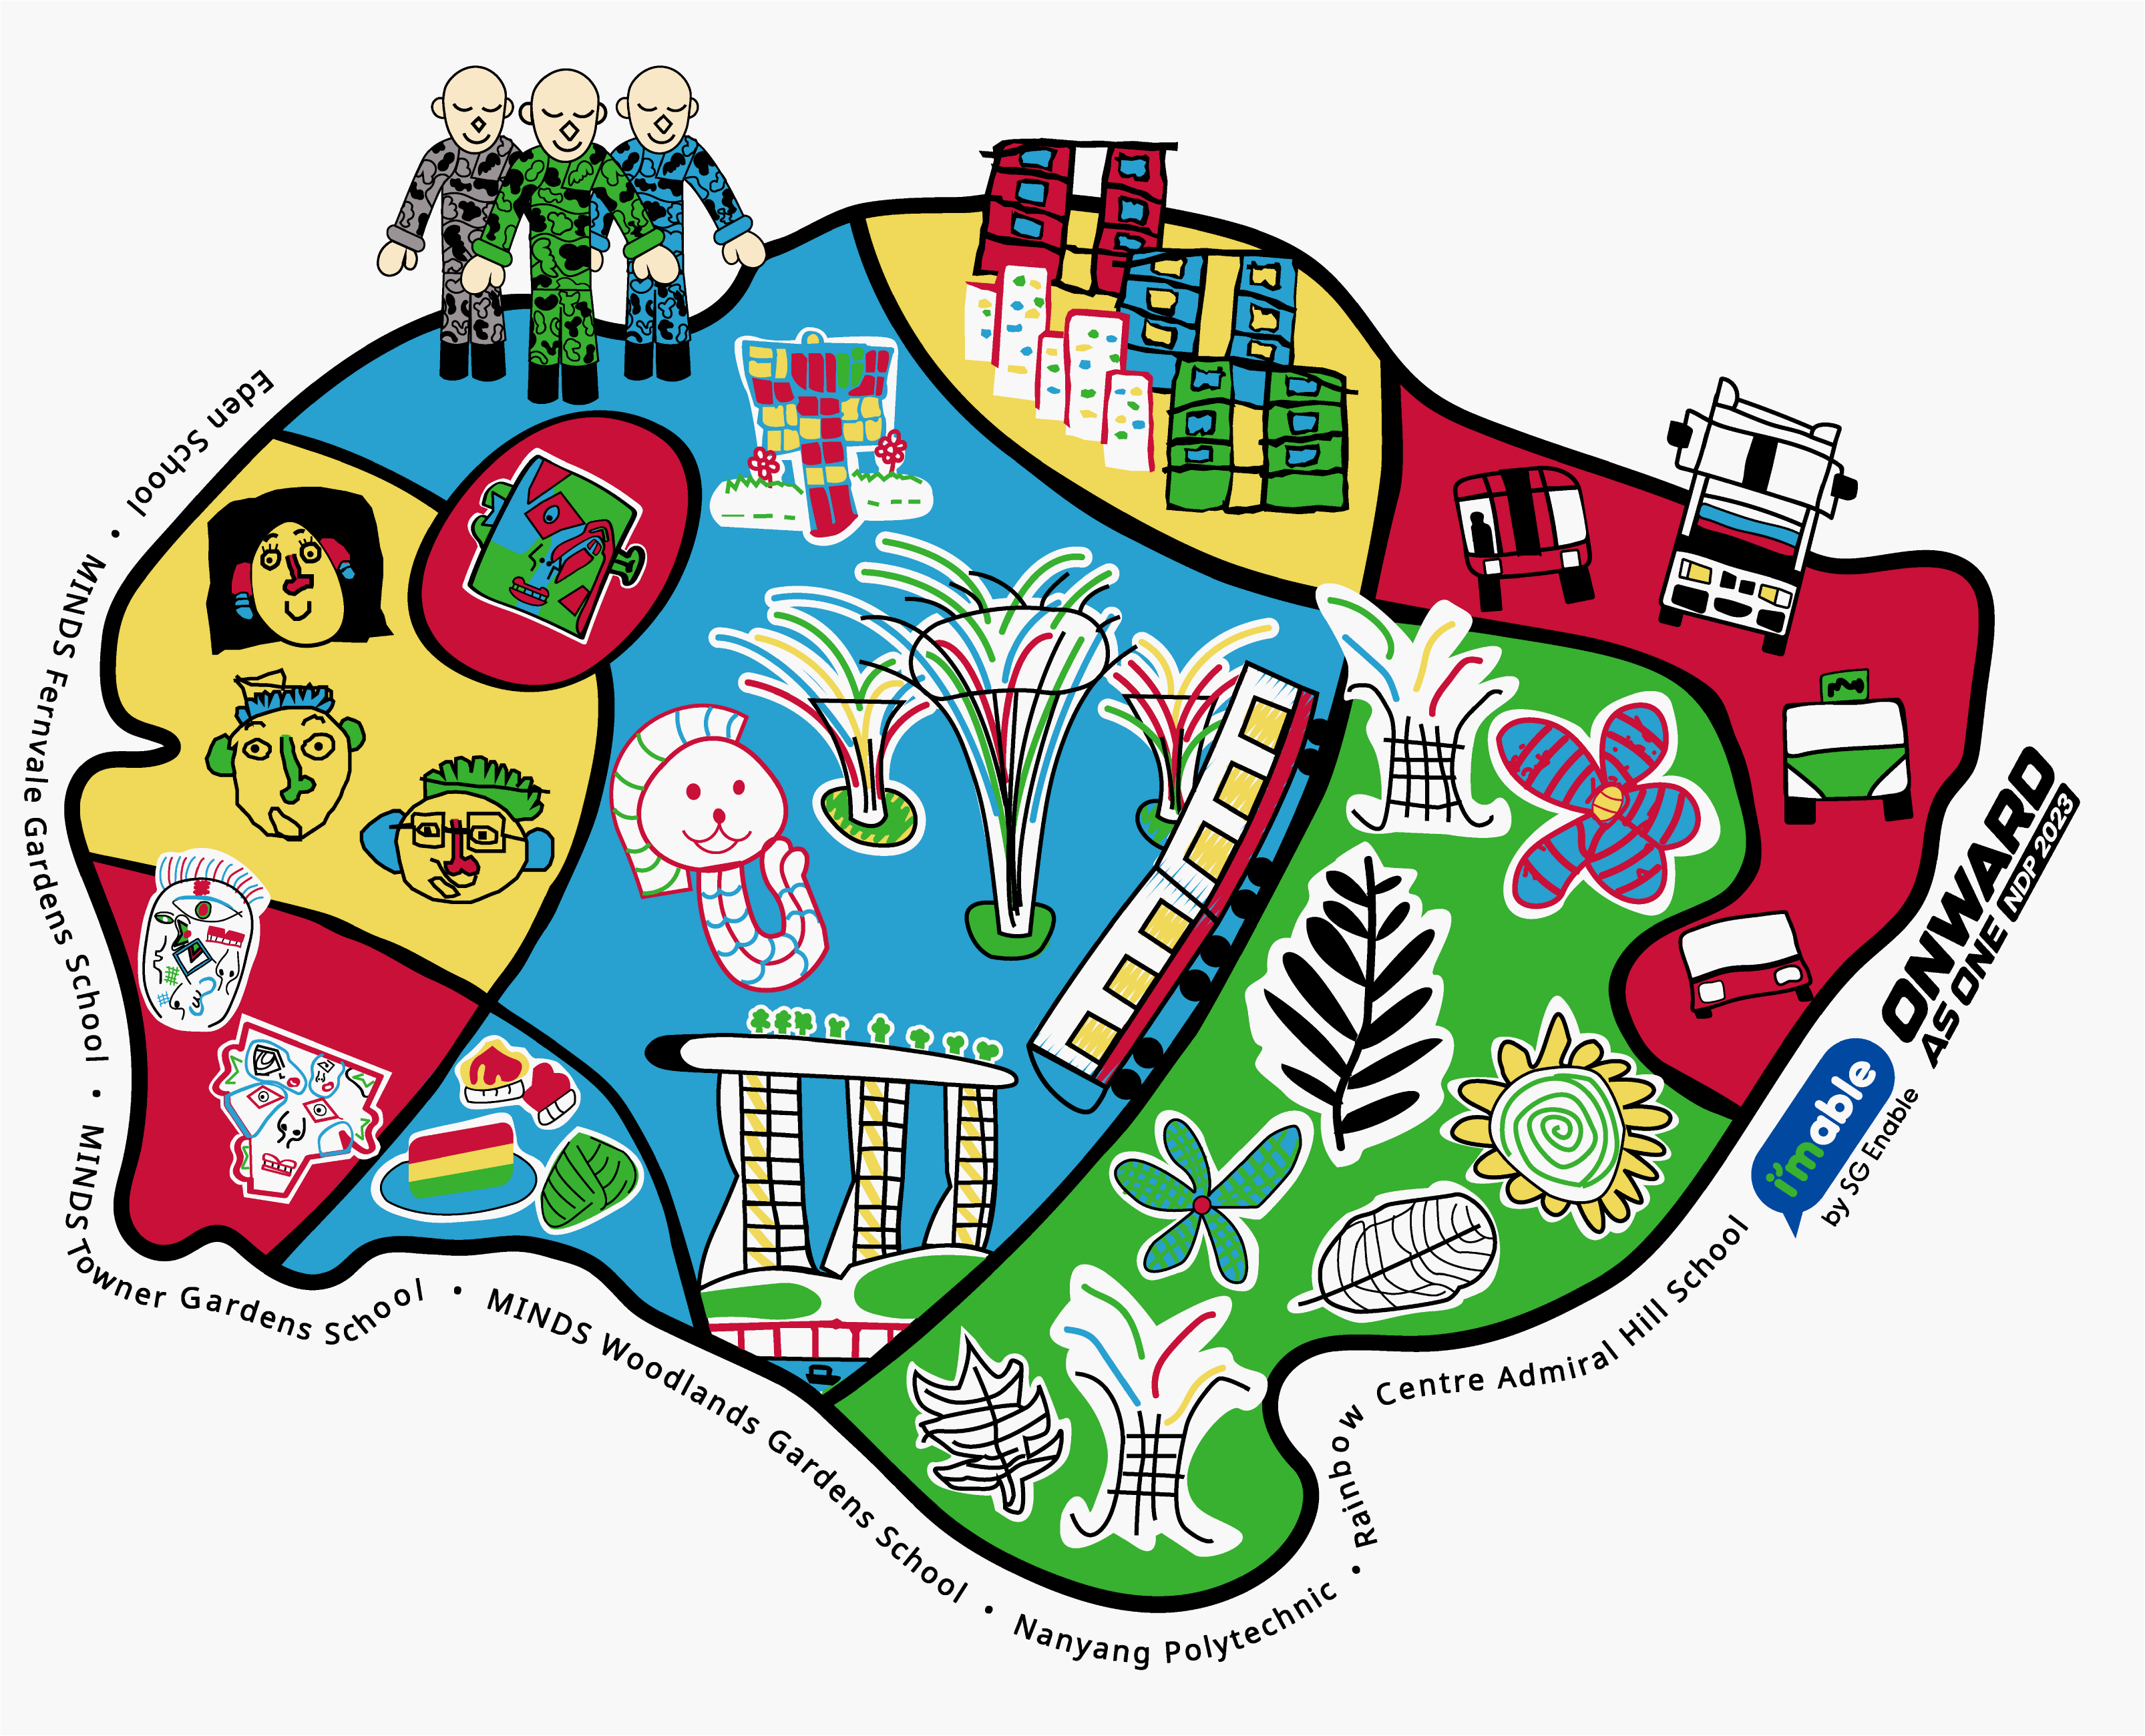 Diversity - A drawing of the Singapore map, with landmarks and specialties of each area drawn out.